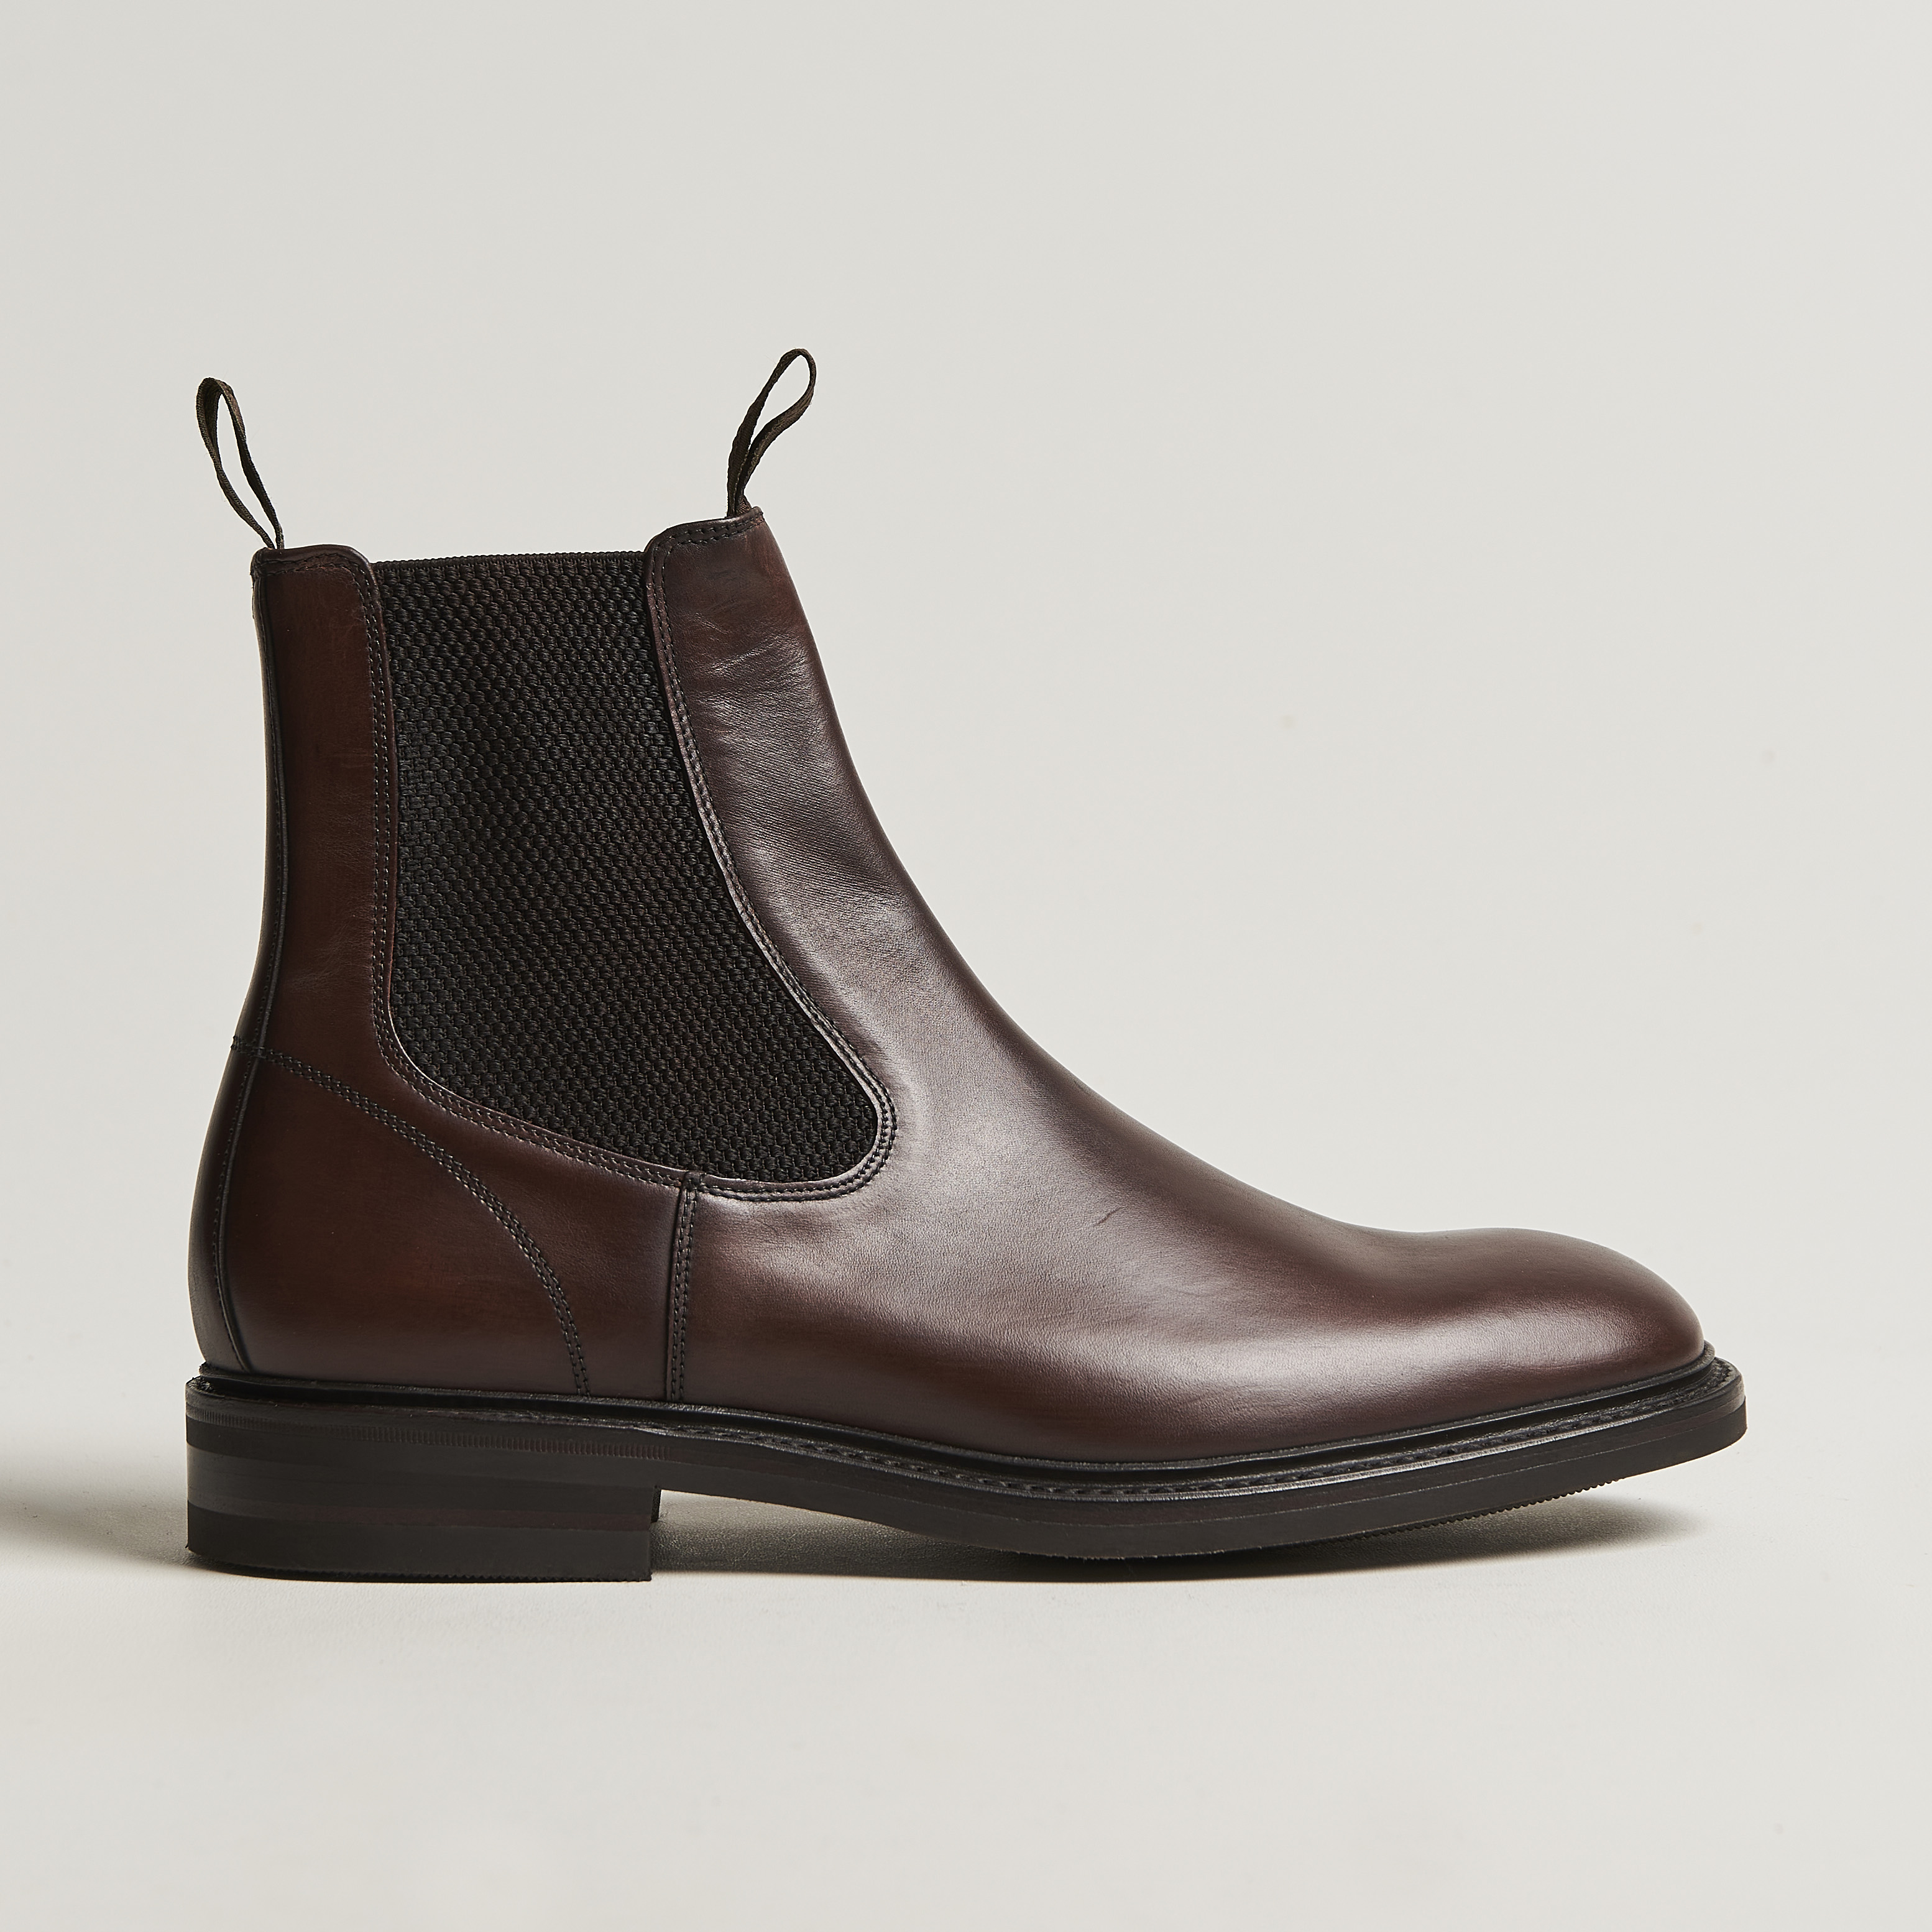 Loake 1880 Dingley Waxed Leather Chelsea Boot Dark Brown at CareOfCarl.com